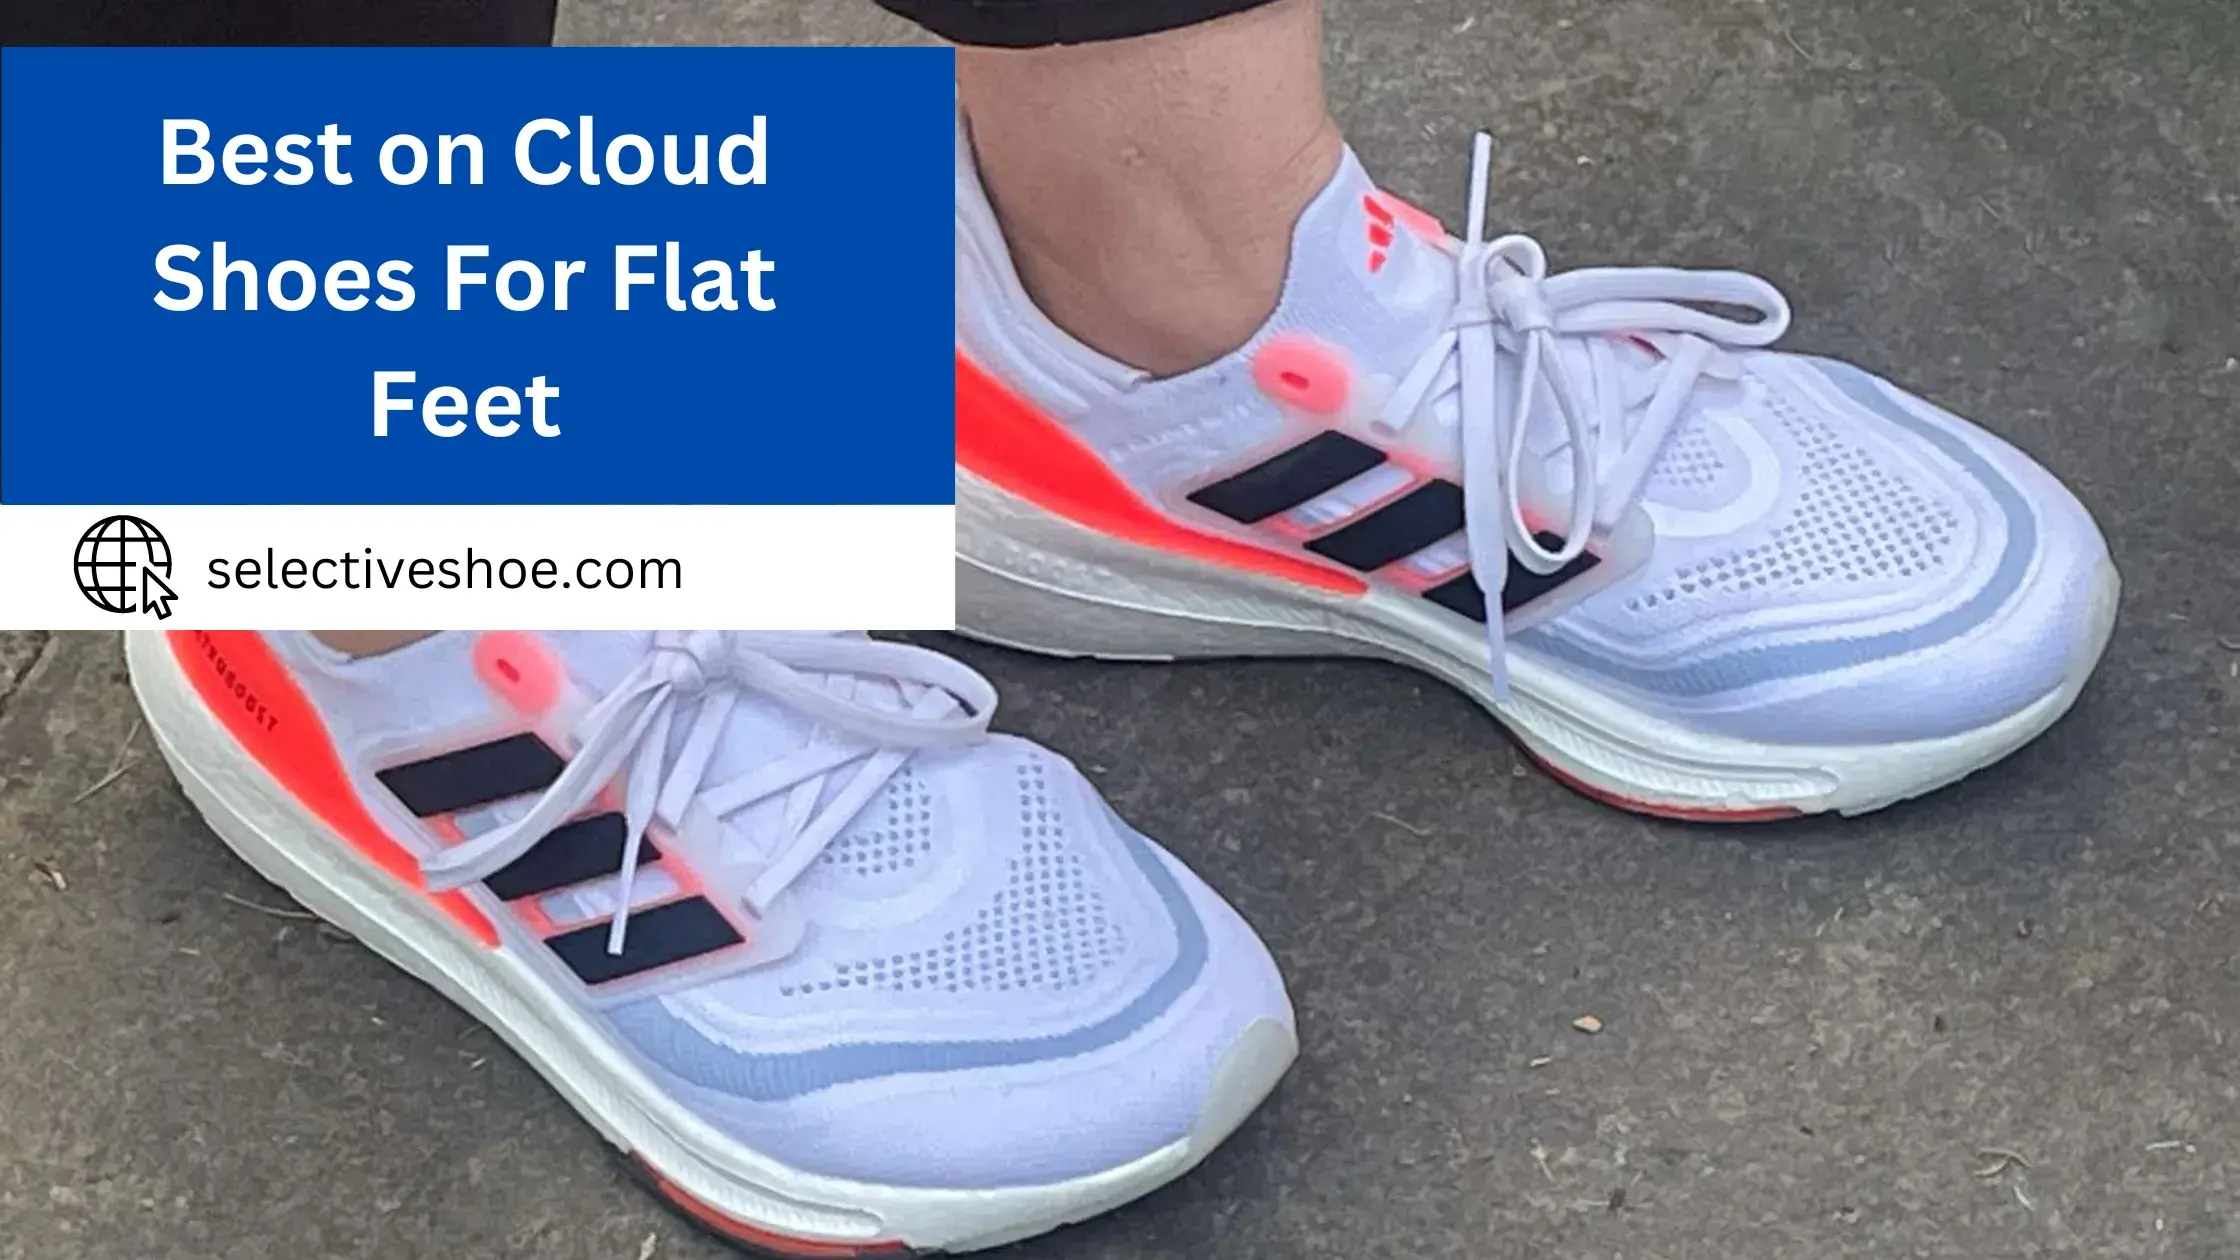 Best On Cloud Shoes For Flat Feet - A Comprehensive Guide